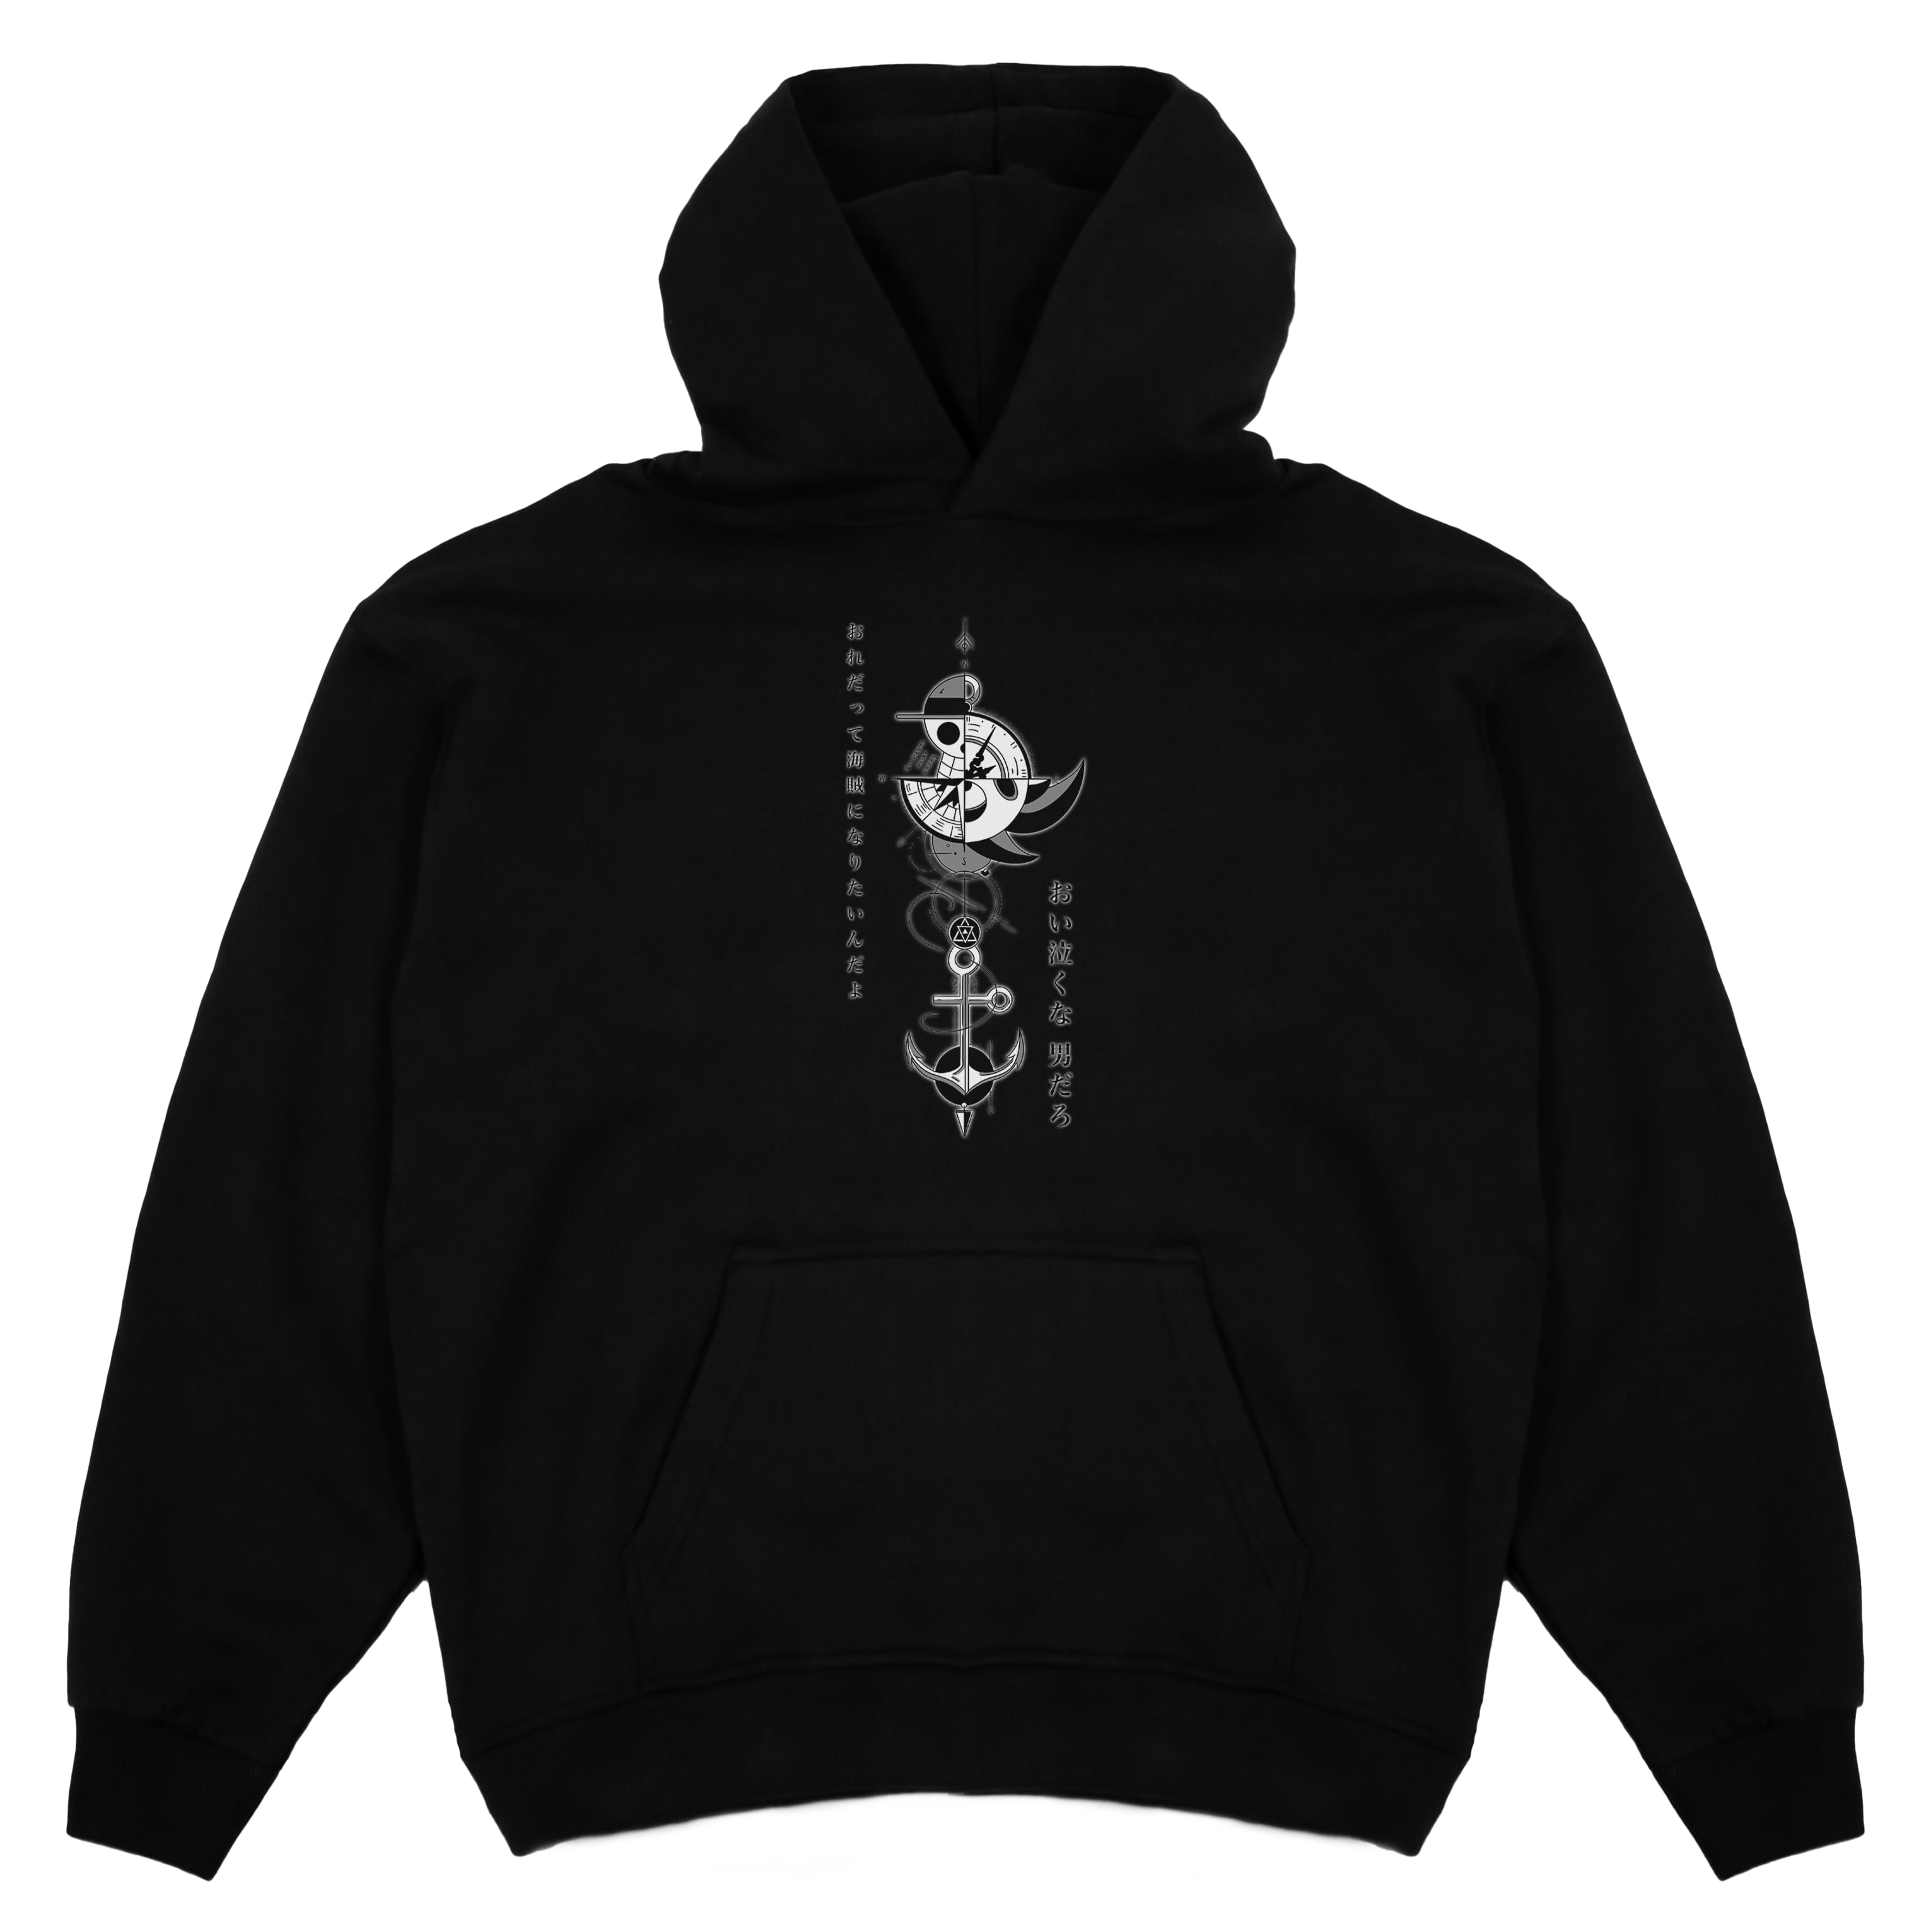 One Piece Our Dreams - Heavy Cotton Oversize Hoodie SALE